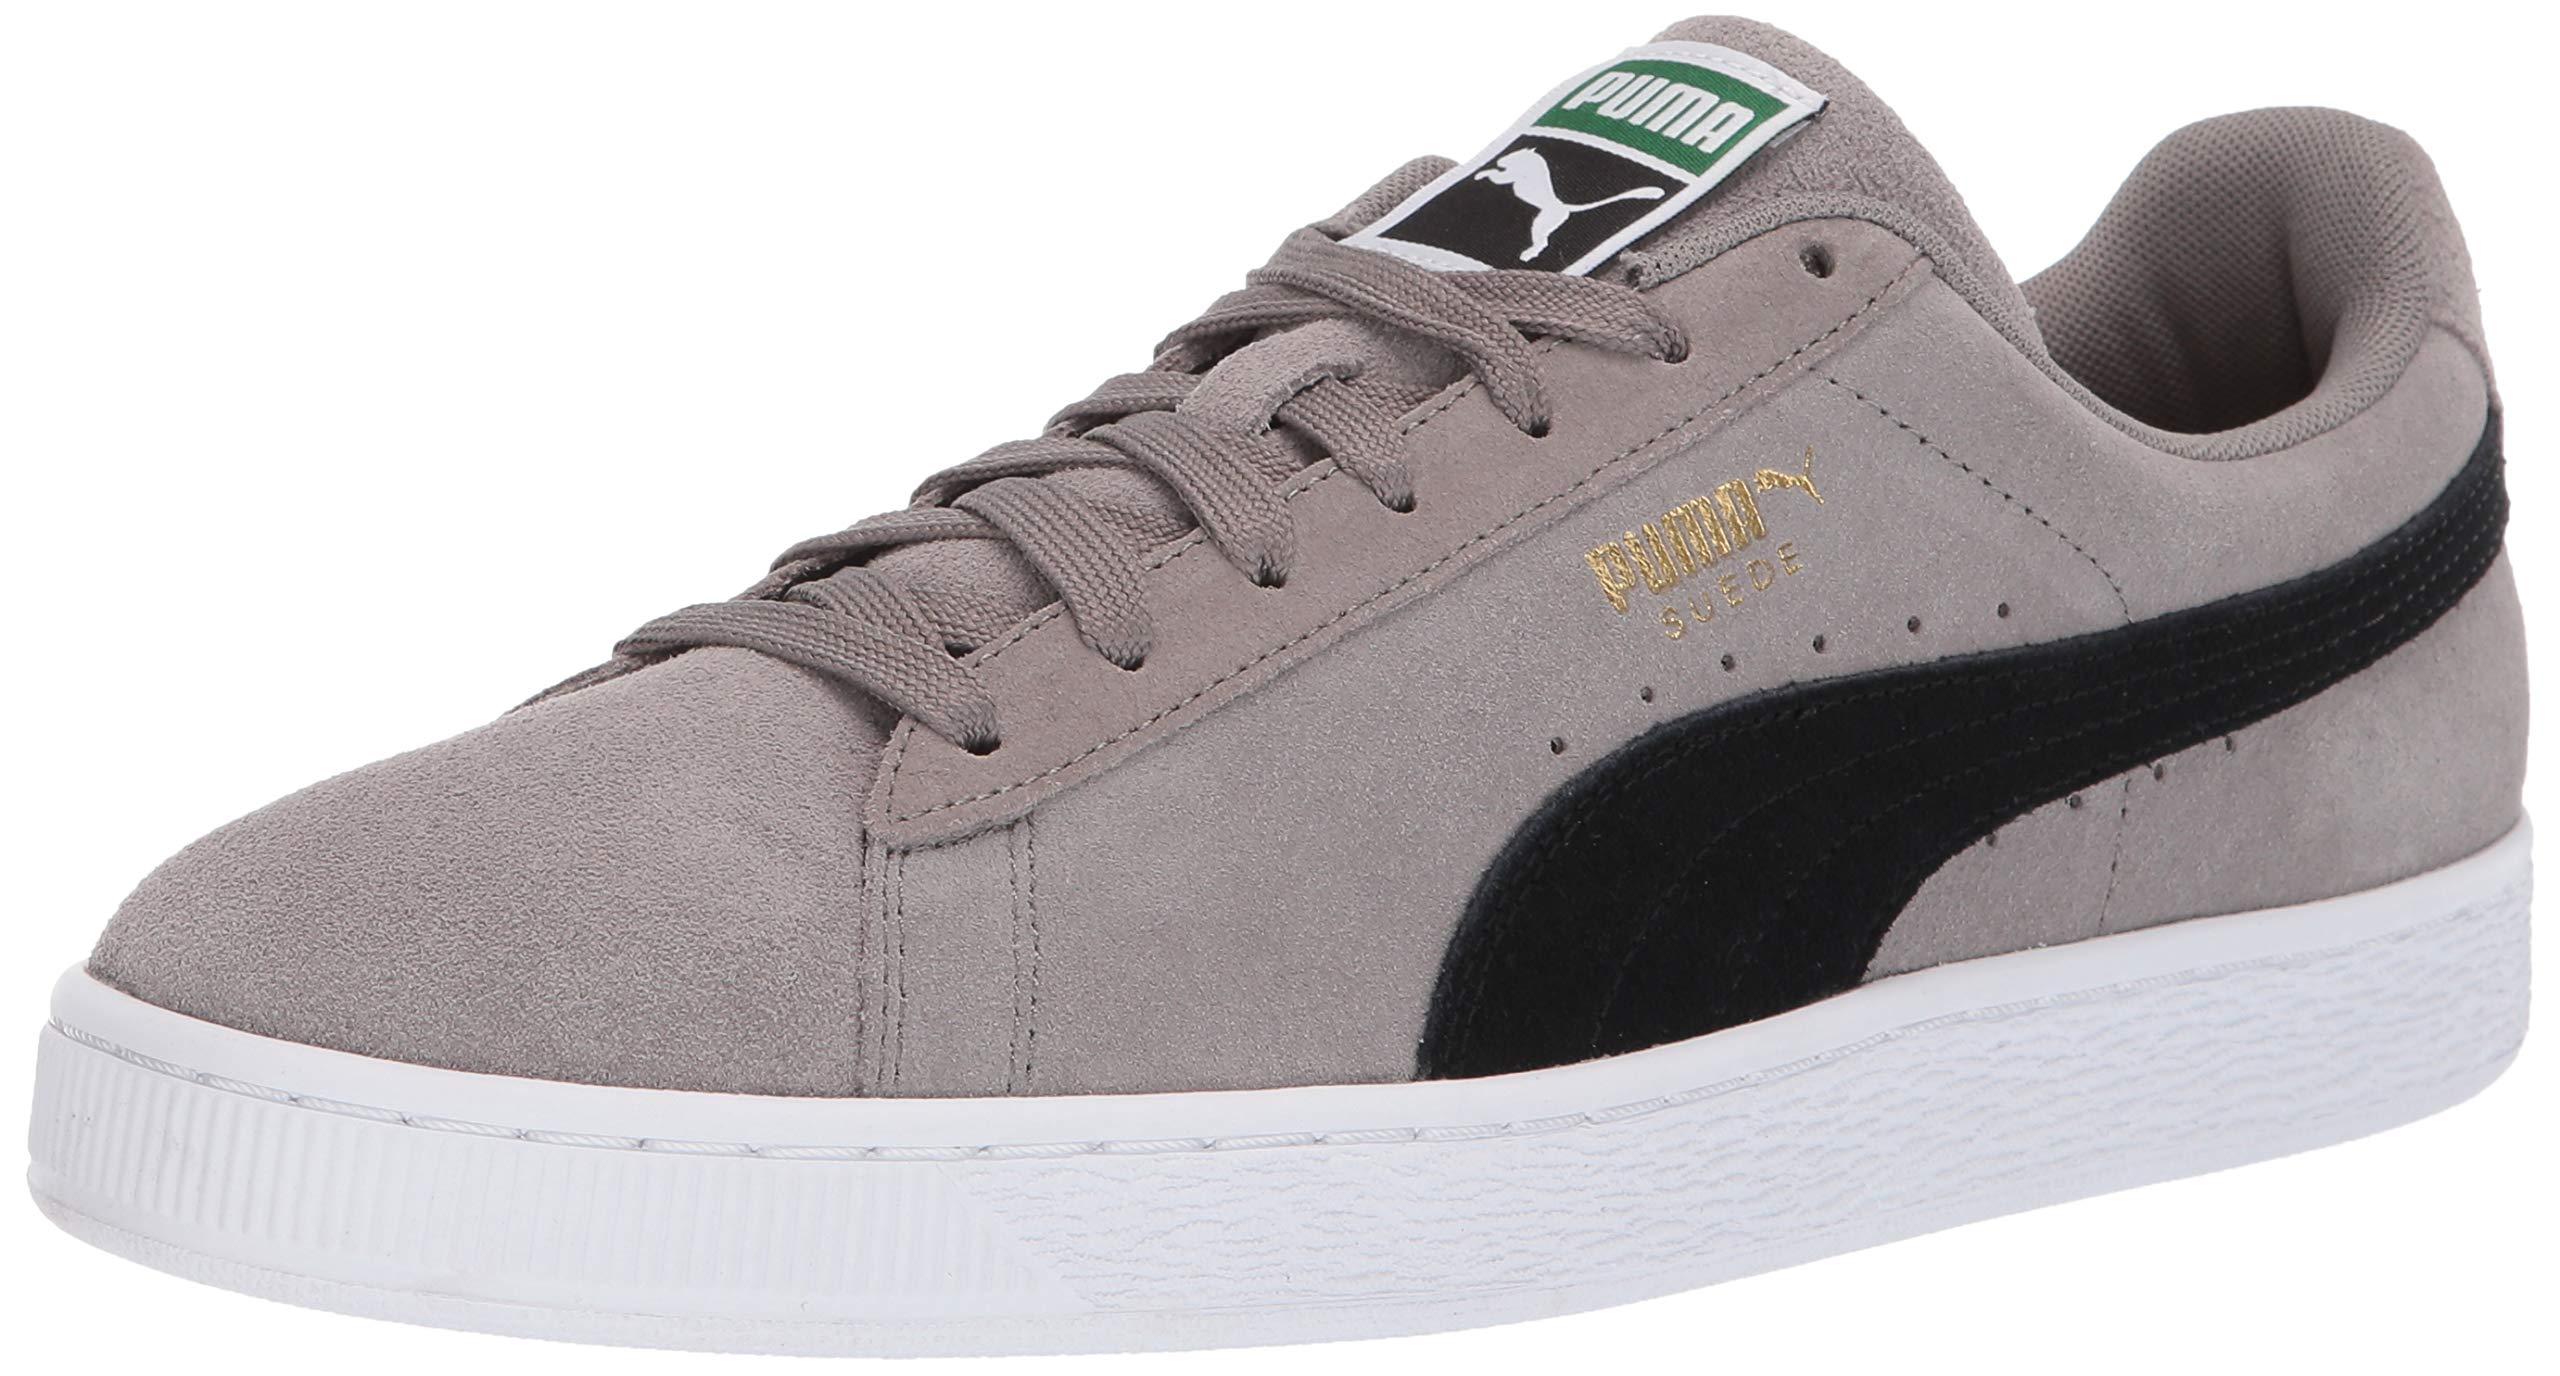 PUMA Suede Classic Sneaker Charcoal Gray B for Men - Lyst